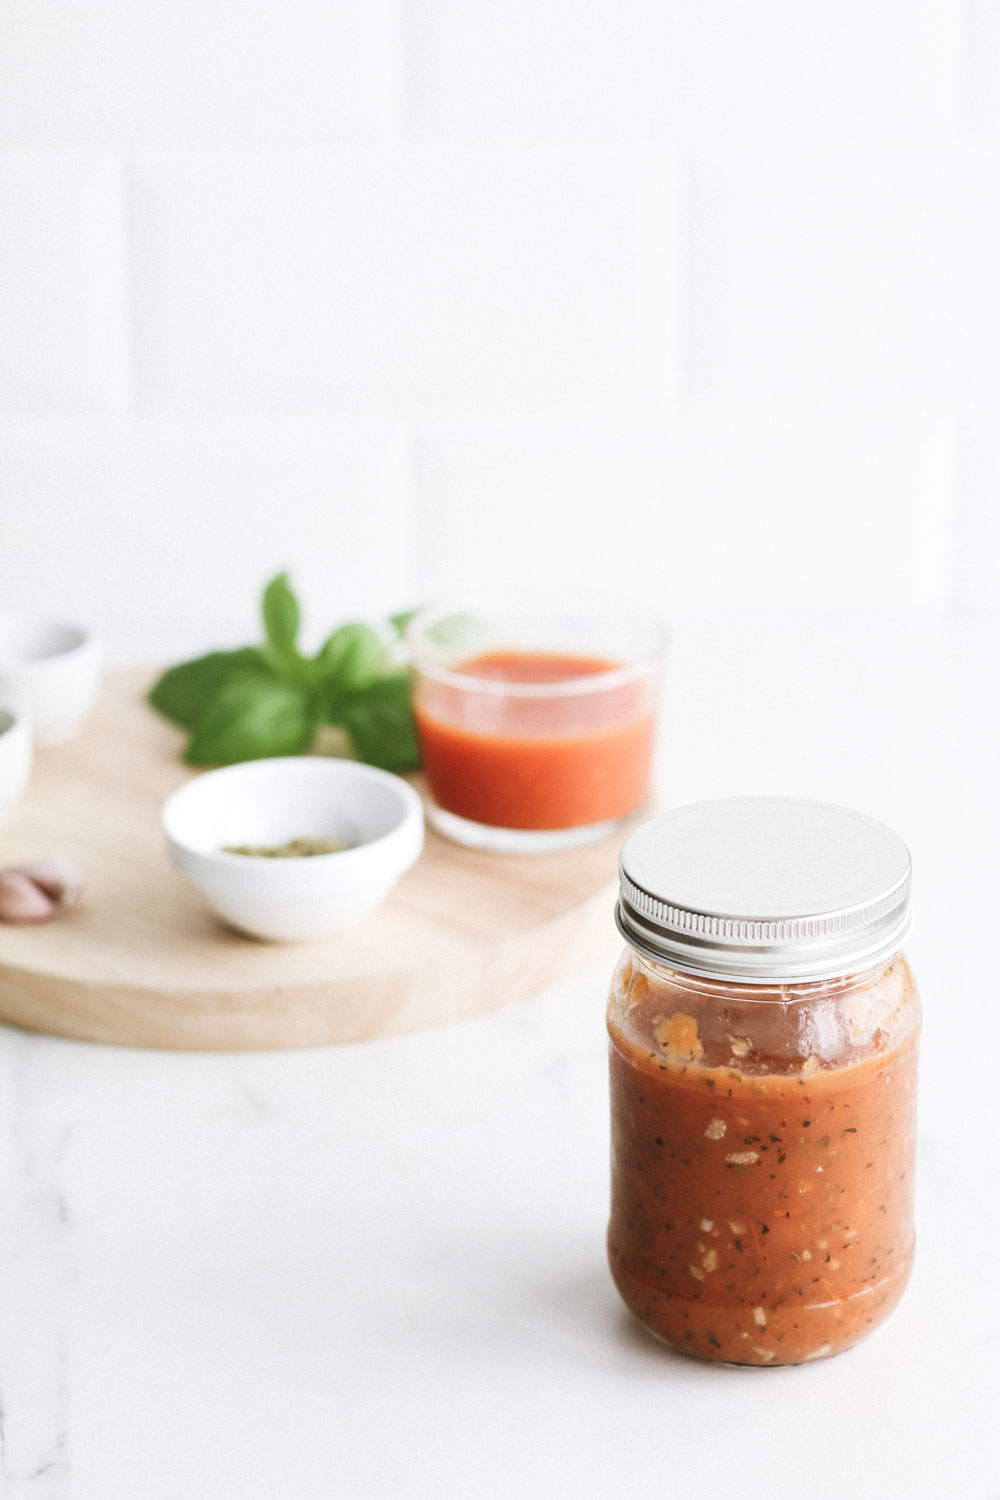 Lycopene Rich Tomato Sauce: Antioxidant and heart-protecting recipe to give yourself a youth boost! https://www.spotebi.com/recipes/lycopene-rich-tomato-sauce/